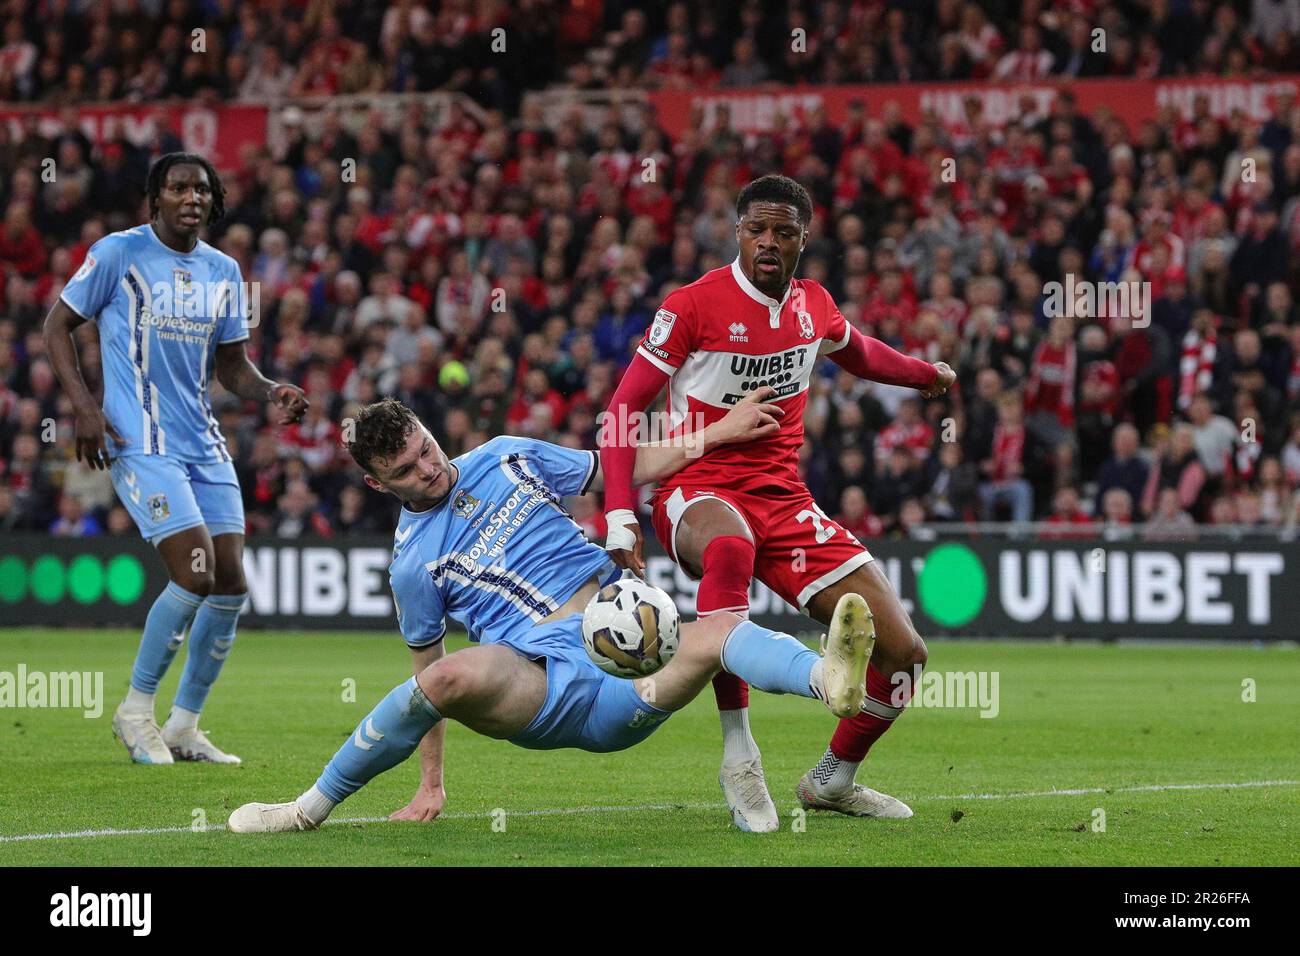 Middlesbrough, UK. 17th May, 2023. Chuba Akpom #29 of Middlesbrough is blocked off by Luke McNally #16 of Coventry City in the first half of the Sky Bet Championship Play-Off match Middlesbrough vs Coventry City at Riverside Stadium, Middlesbrough, United Kingdom, 17th May 2023 (Photo by James Heaton/News Images) in Middlesbrough, United Kingdom on 5/17/2023. (Photo by James Heaton/News Images/Sipa USA) Credit: Sipa USA/Alamy Live News Stock Photo